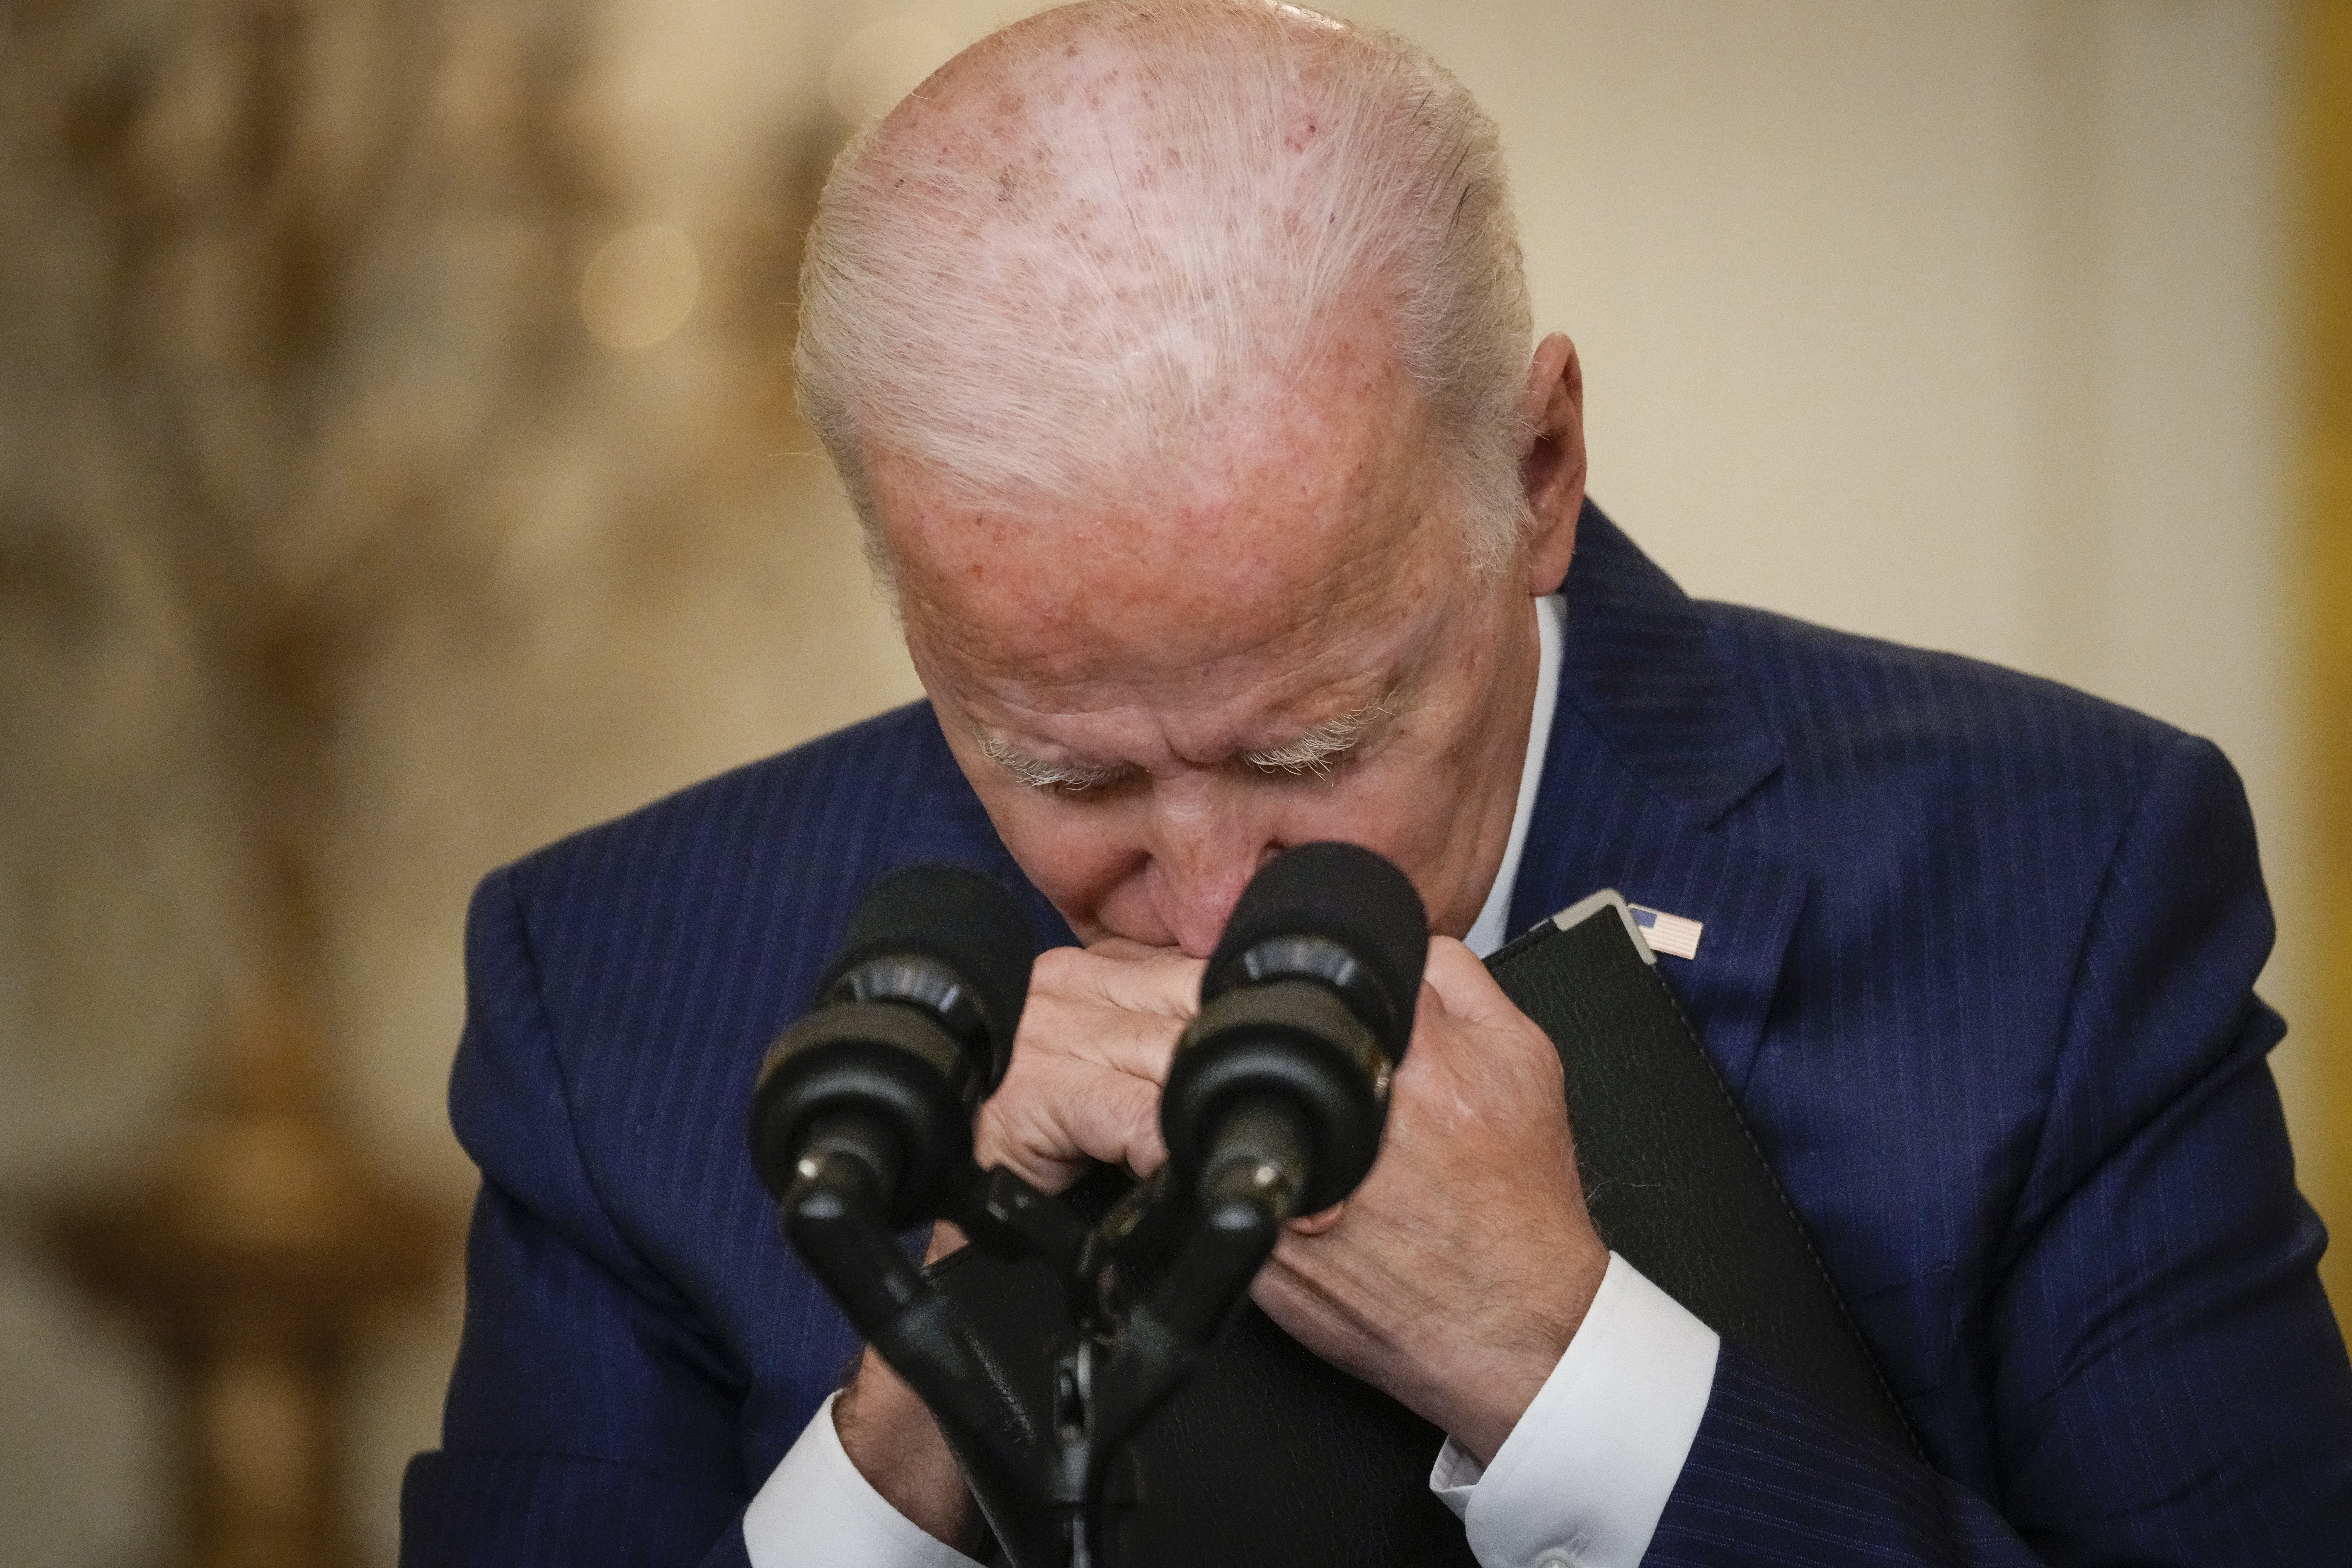 WASHINGTON, DC - AUGUST 26: U.S. President Joe Biden pauses while listening to a question from a reporter about the situation in Afghanistan in the East Room of the White House on August 26, 2021 in Washington, DC. (Drew Angerer/Getty Images)